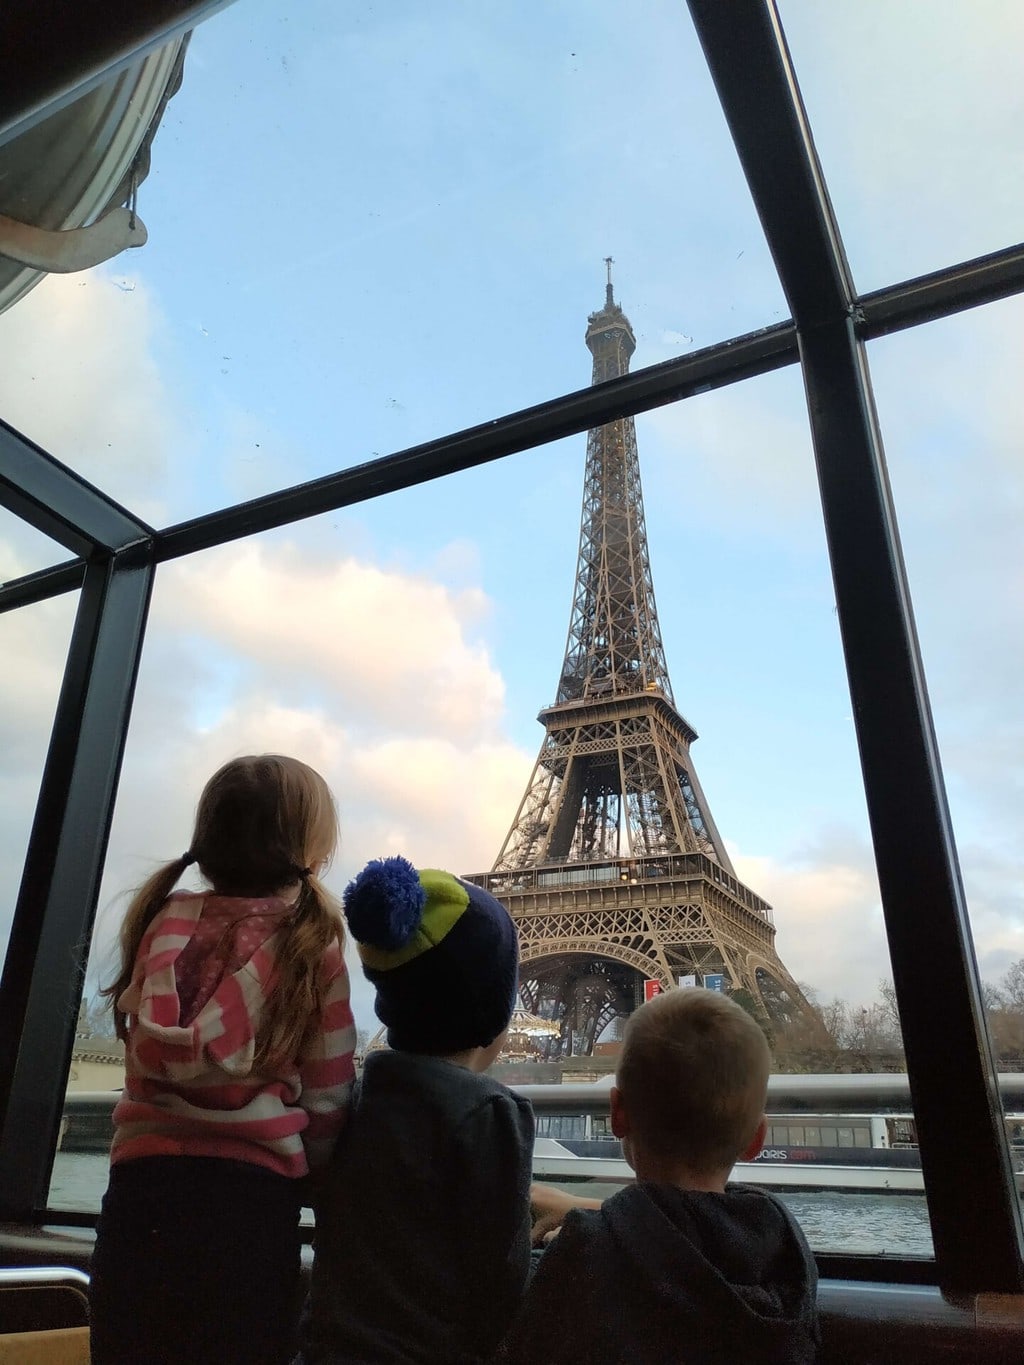 Visiting the Eiffel Tower with Kids